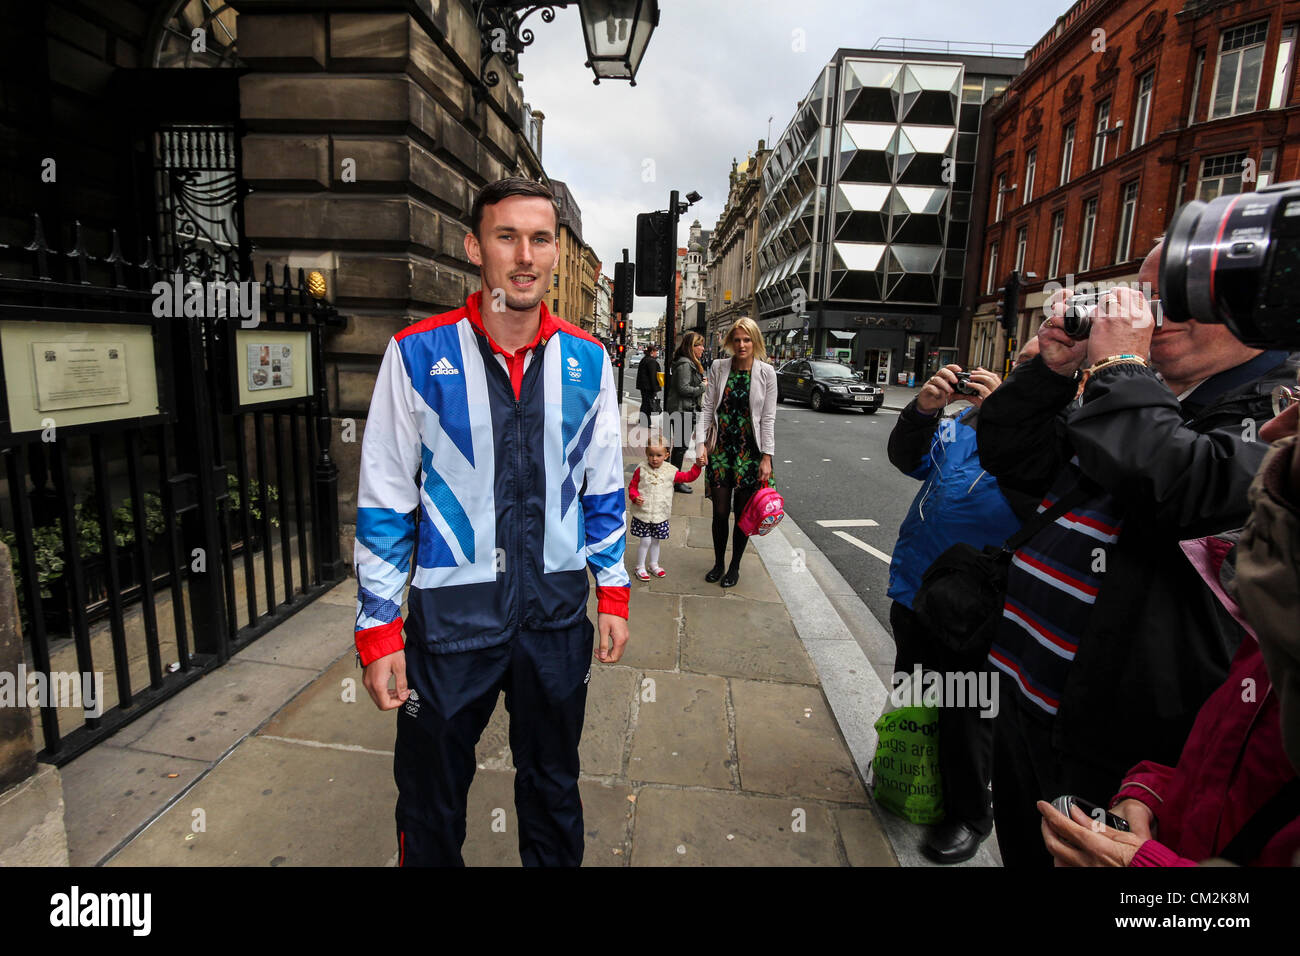 Liverpool, UK. 21st September, 2012. Taekwondo athlete Martin Stamper stops for photographs outside the Liverpool Town Hall. Olympians and Paralympians, who come from or trained in Liverpool, attend a reception at Liverpool's Town Hall on Friday, September 21, 2012 to honour their achievements at the London 2012 Summer Olympic and Paralympic Games. Stock Photo